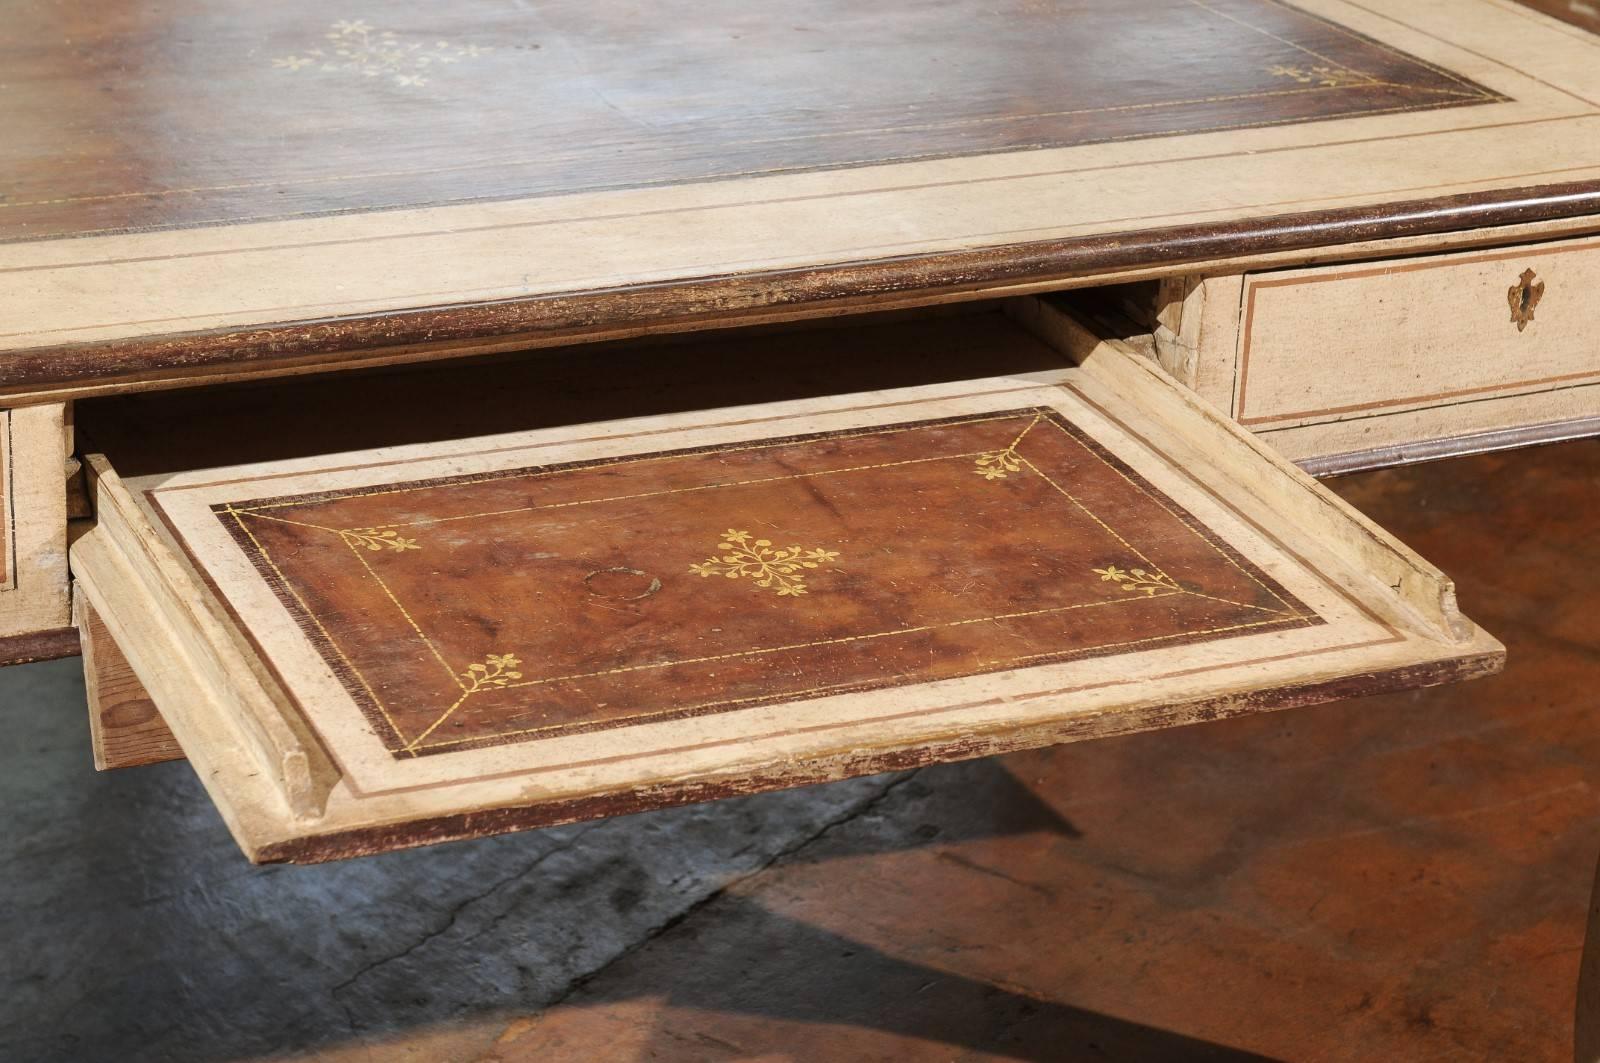 1790s Italian Painted Wood Desk with Hidden Drawers and Faux Leather Top 2